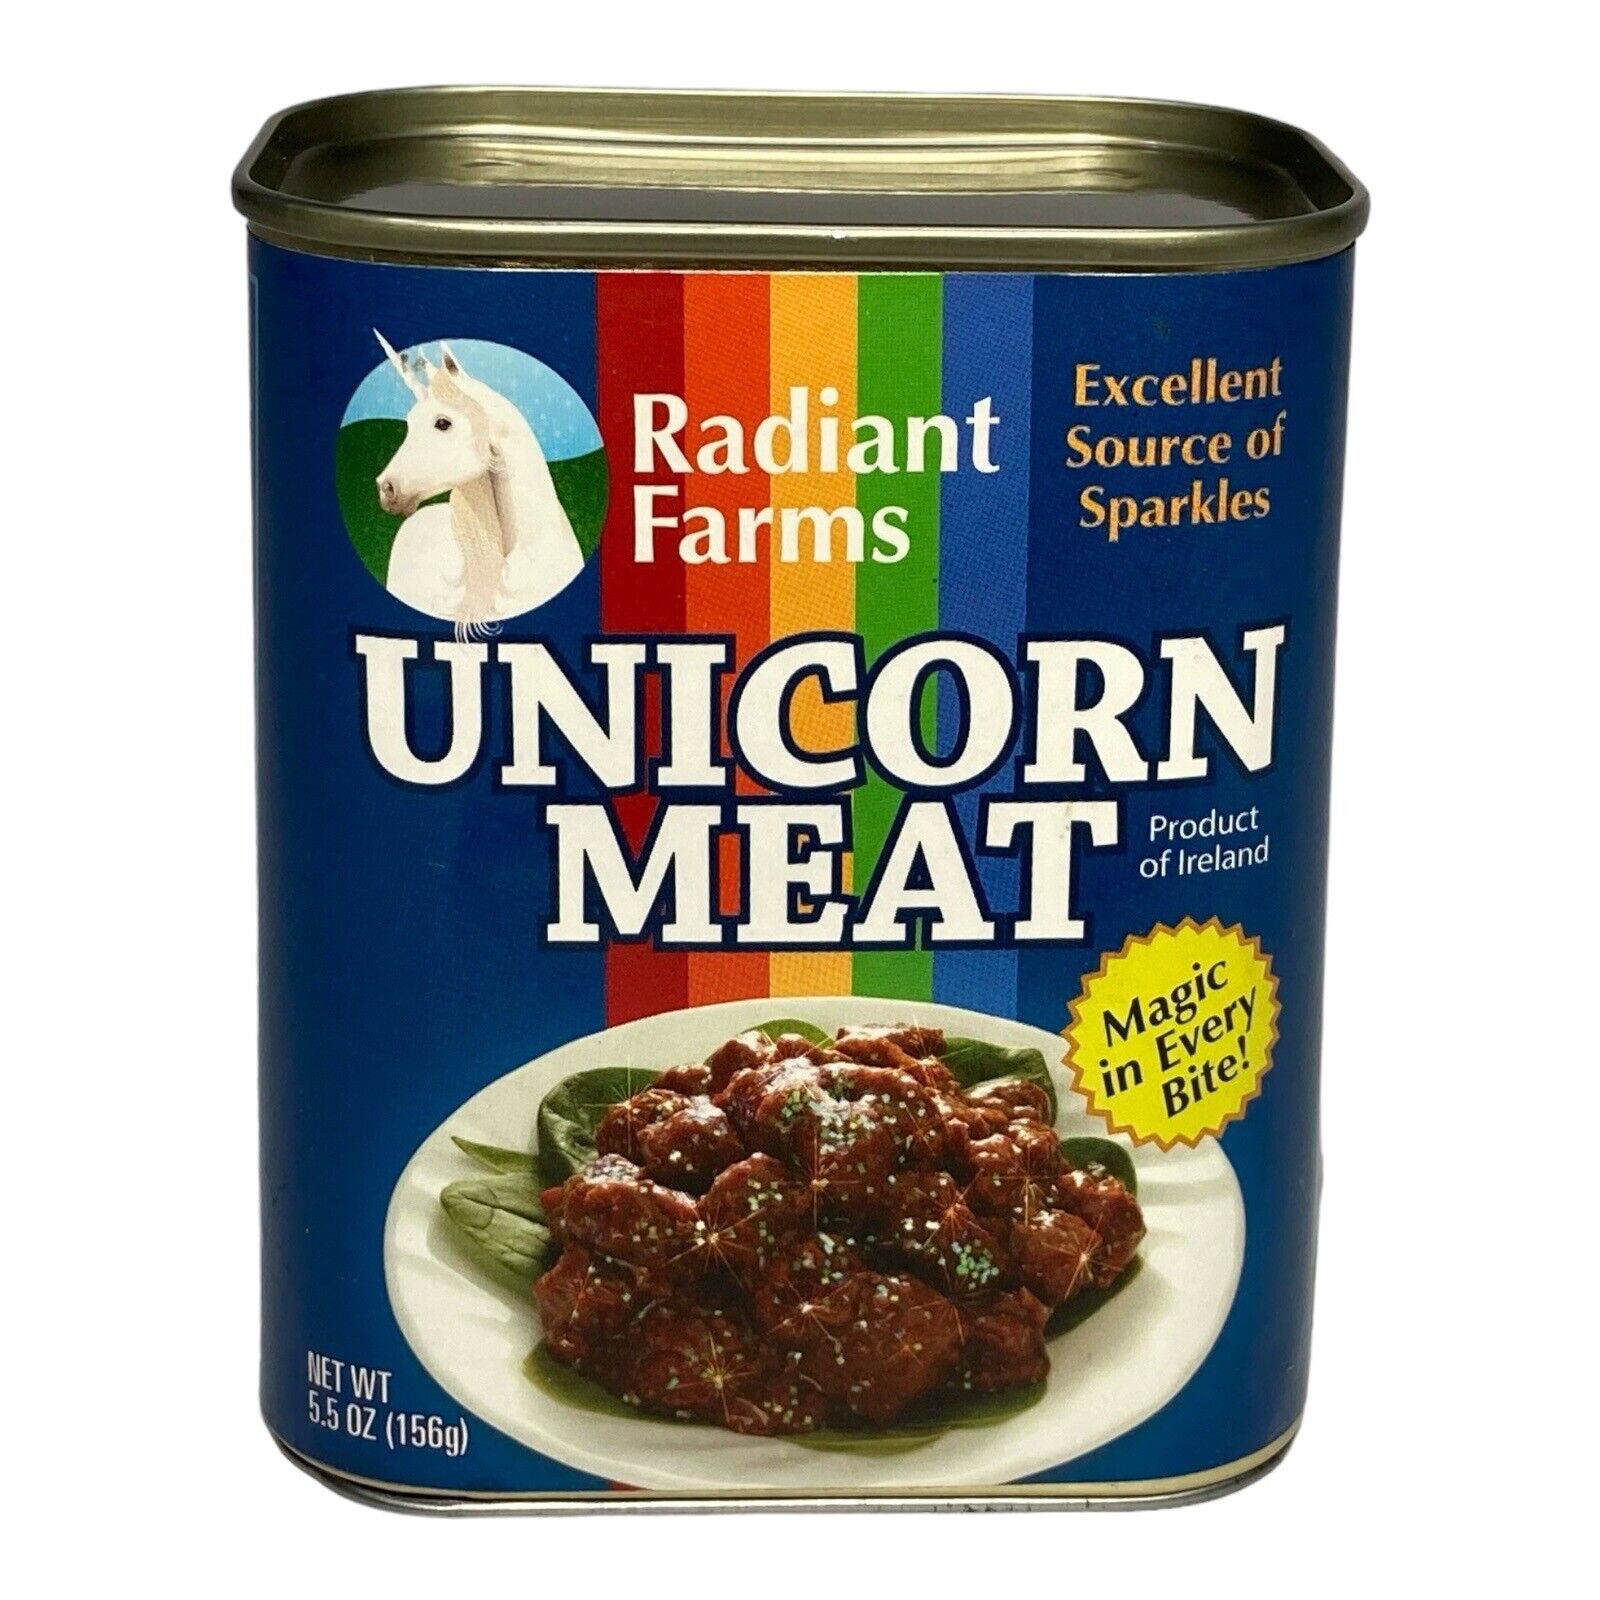 Radiant Farms Canned Unicorn Meat, ThinkGeek Novelty Gift, 2010 Discontinued